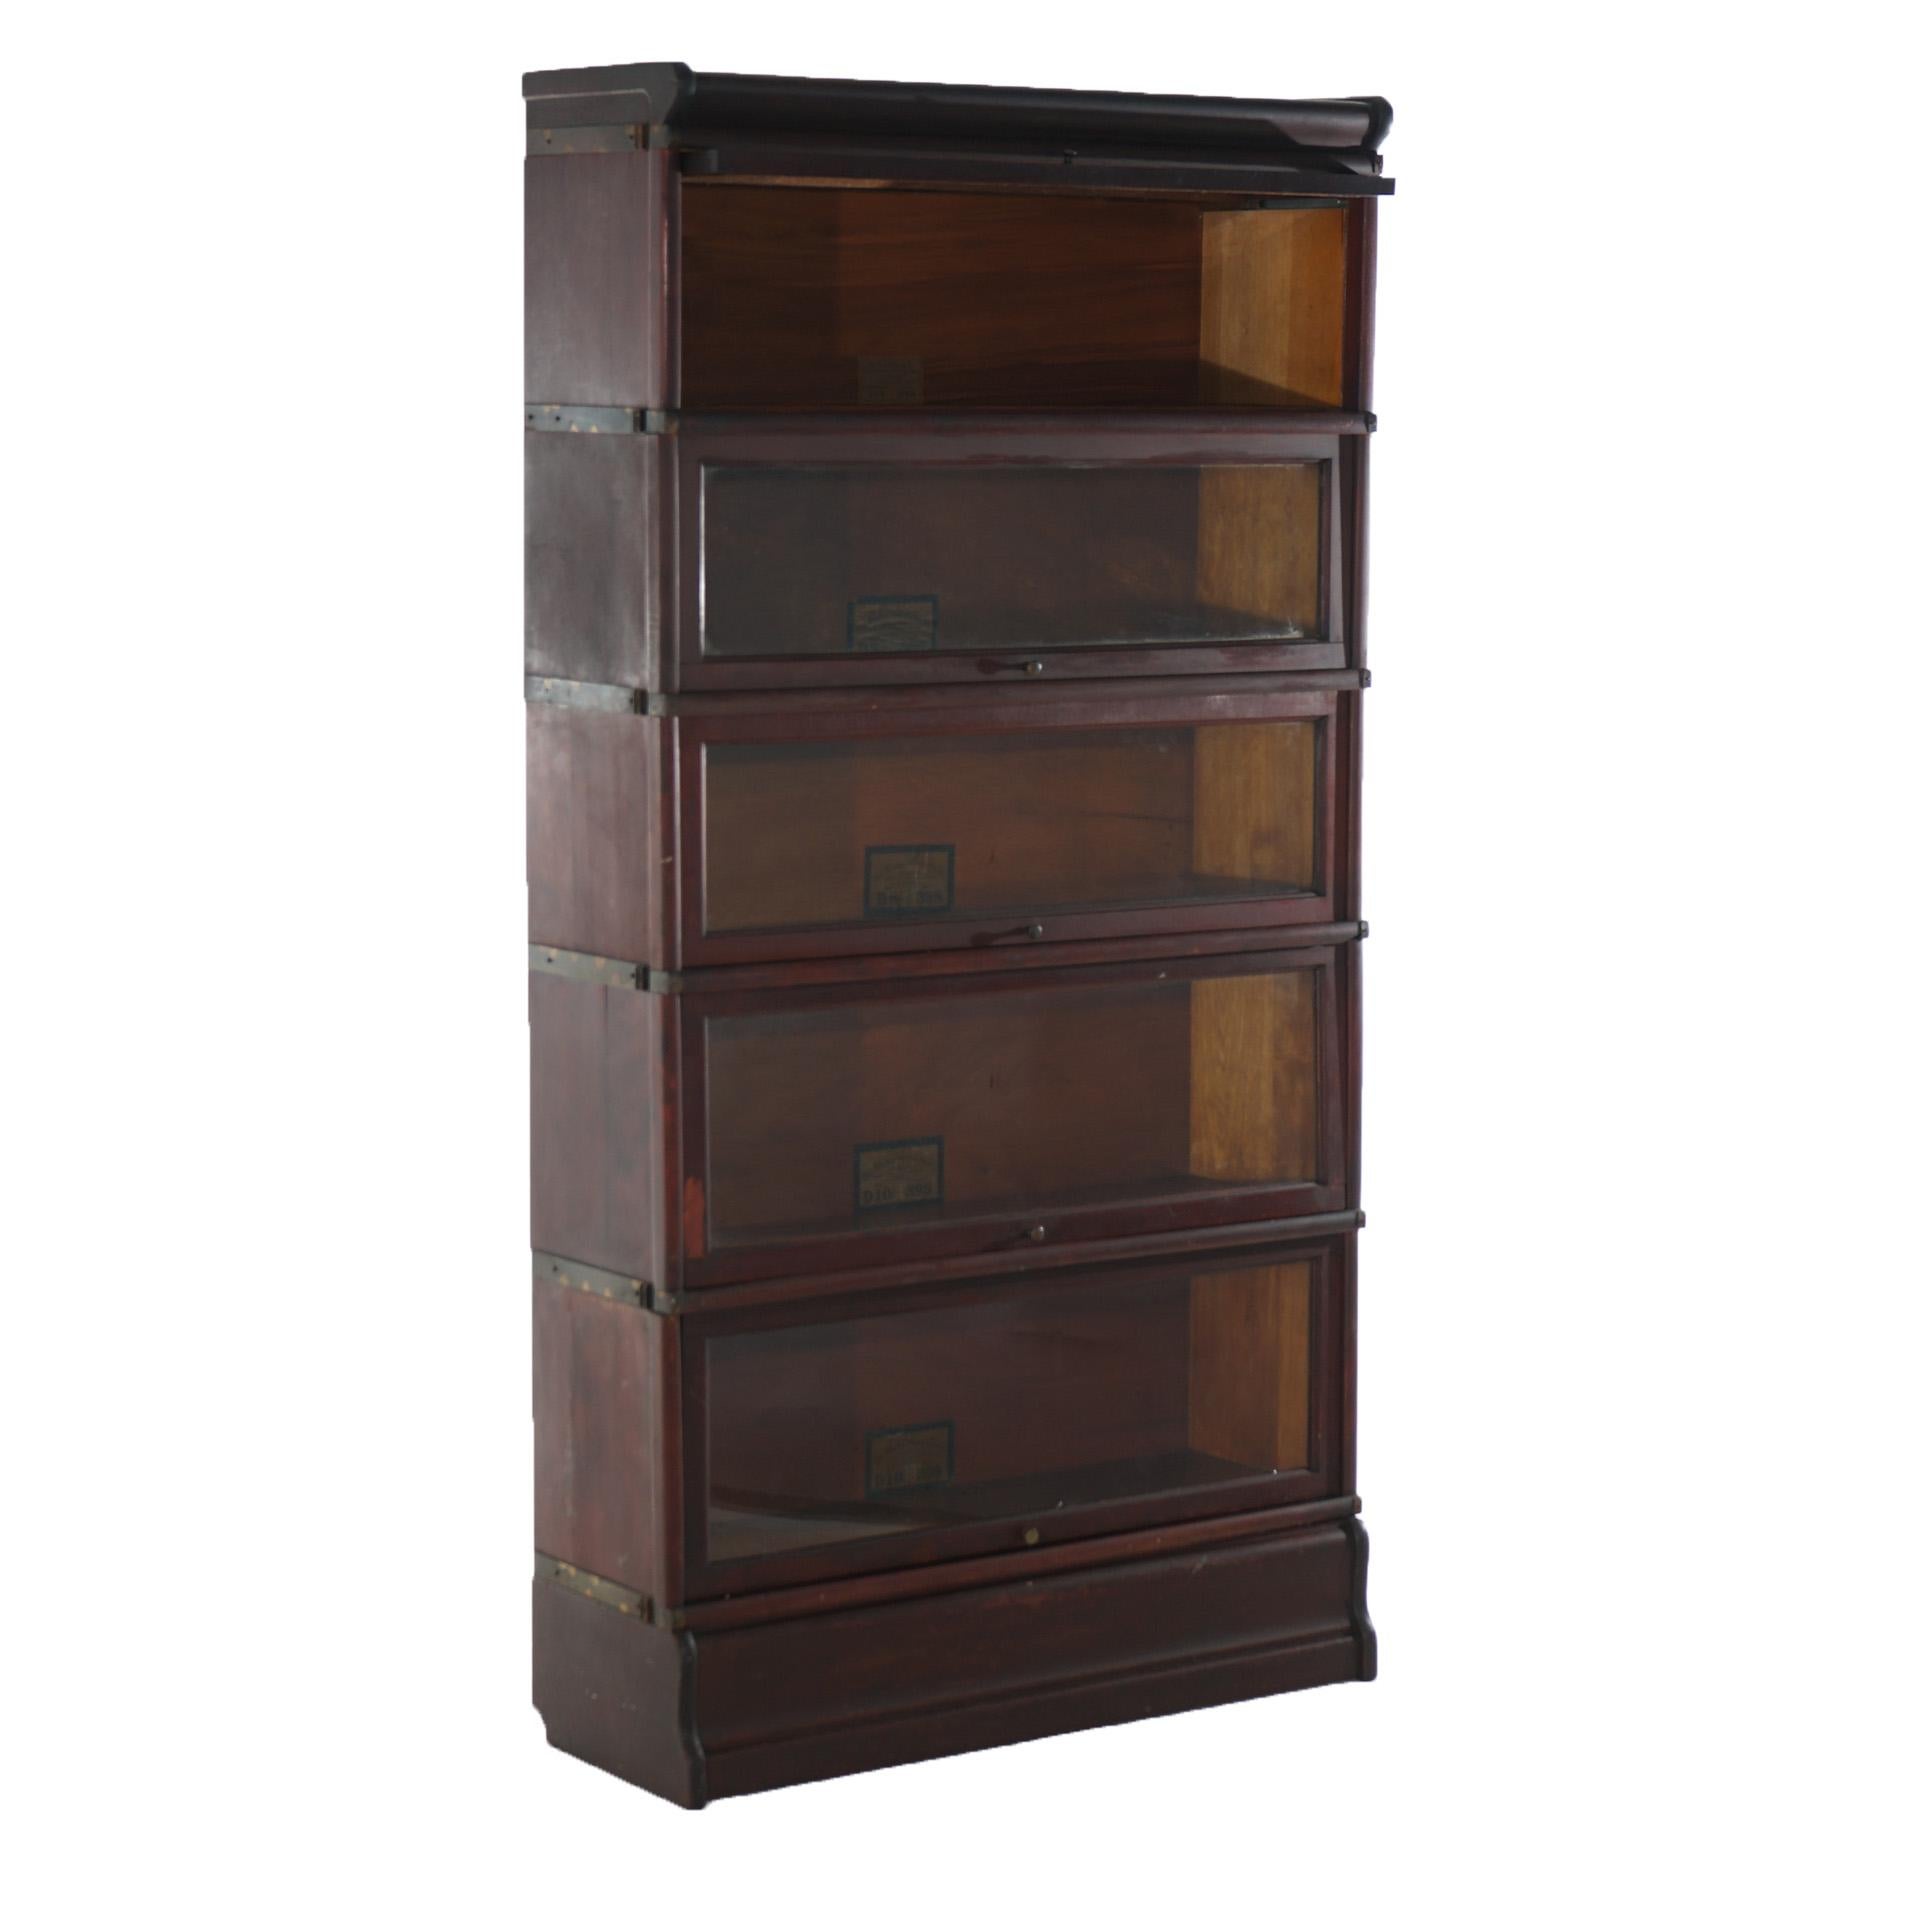 An antique Arts & Crafts bookcase by Globe Wernicke offers mahogany construction with five stacks, each having pull-out glass doors and raised on an ogee base, maker label as photographed., c1910

Measures - Overall 66.5''H x 34''W x 12.5''D; three